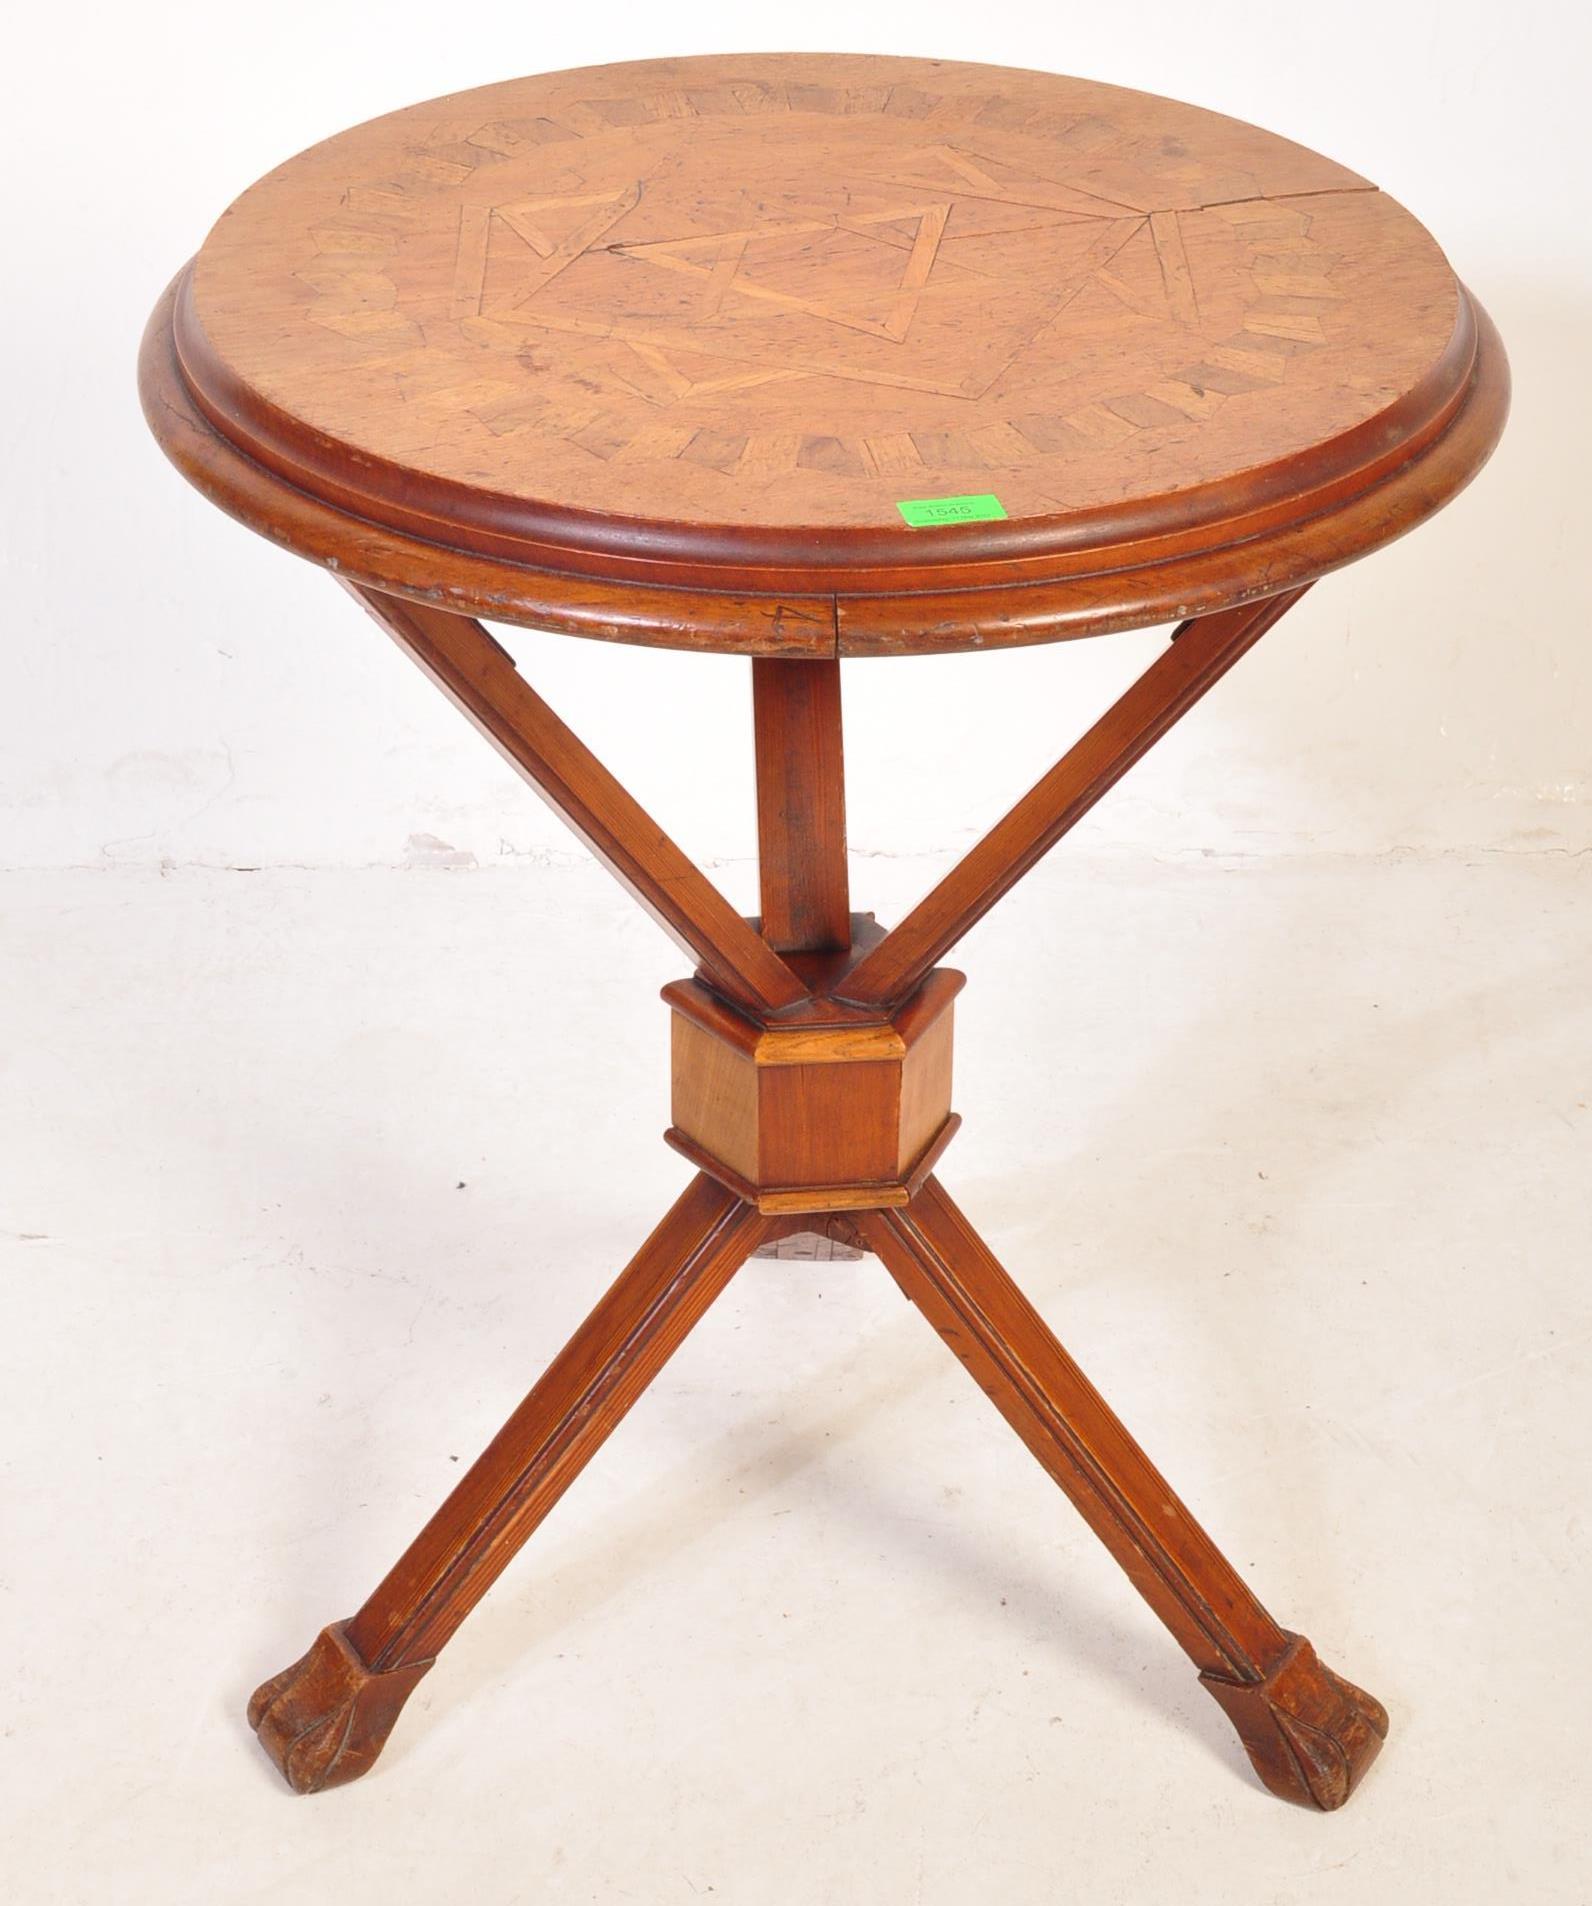 EARLY 20TH CENTURY CRICKET TABLE WITH INLAY - Image 2 of 9